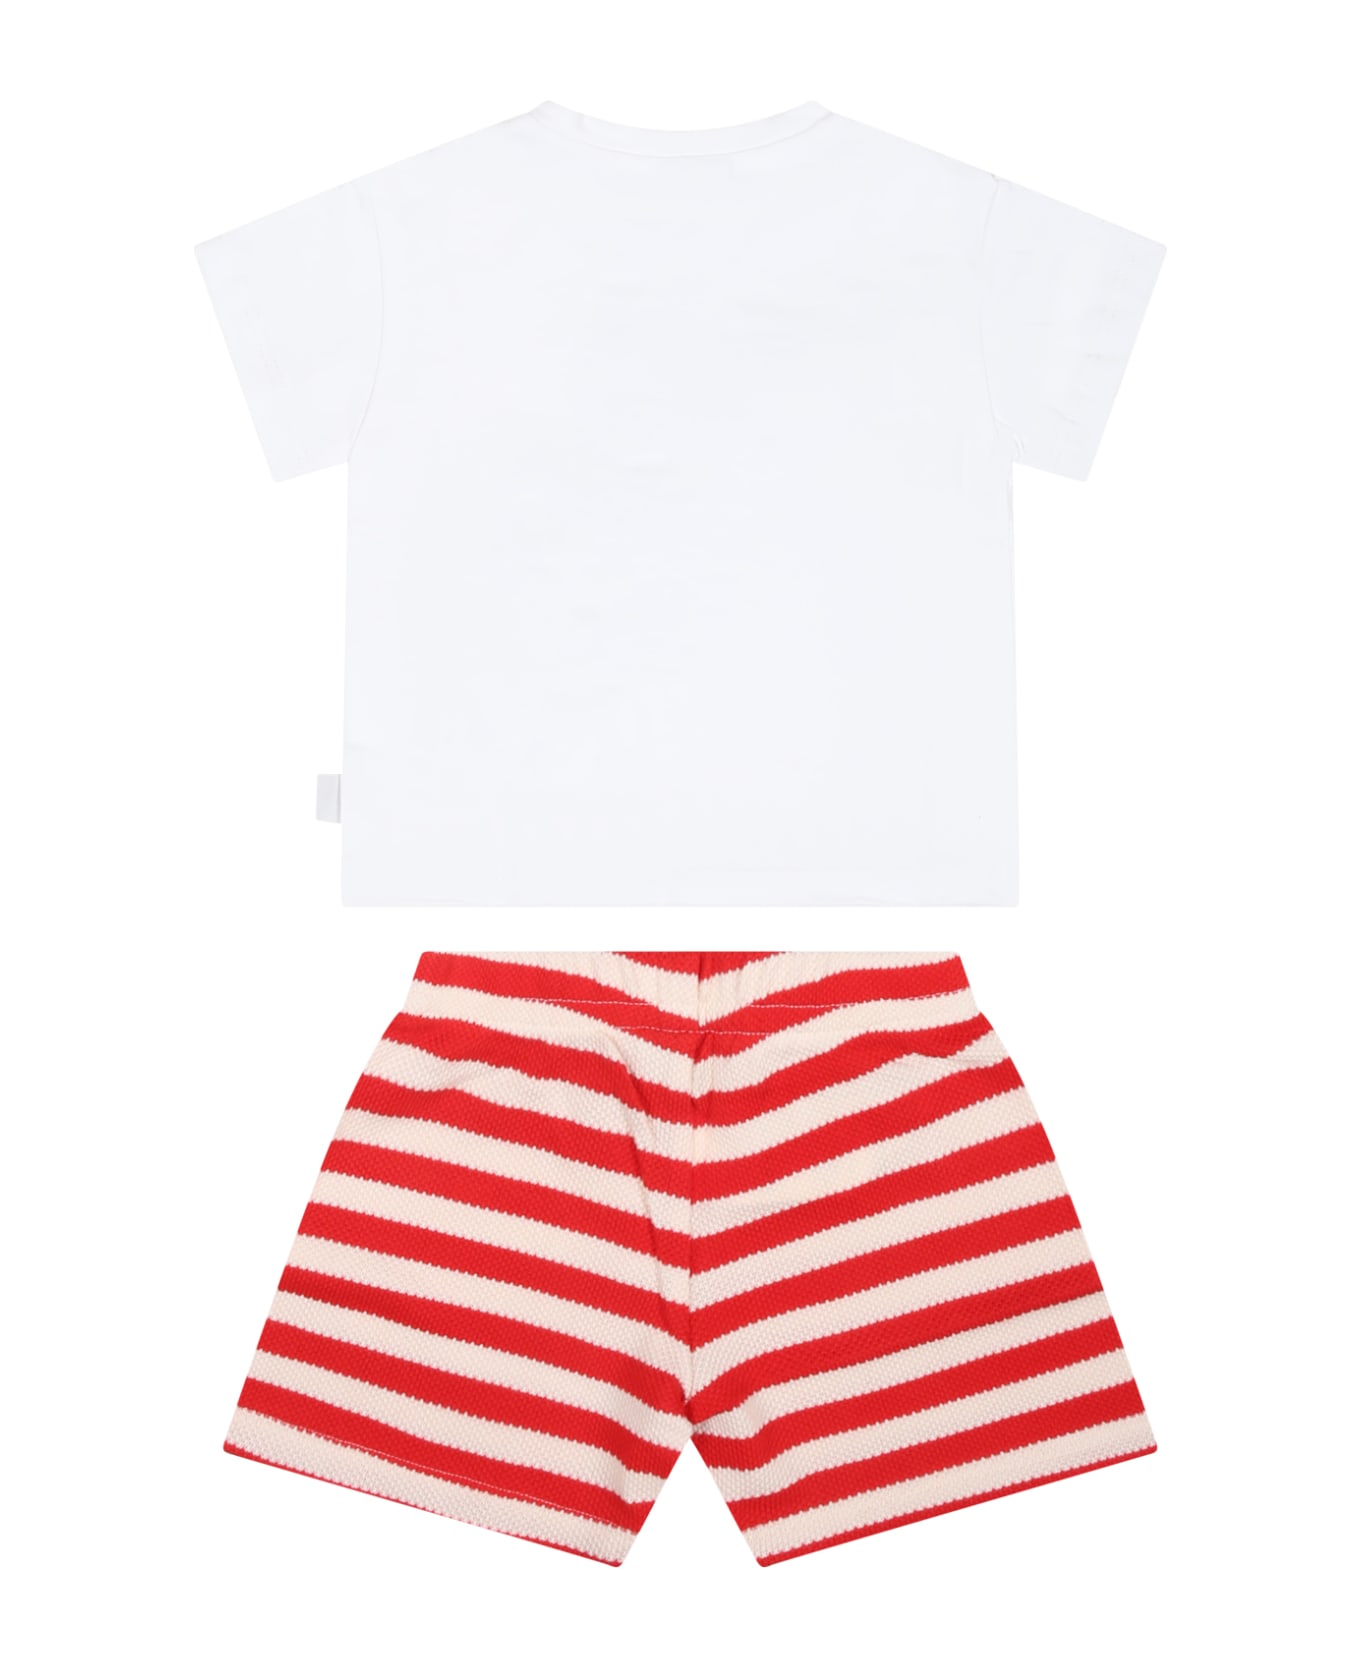 GCDS Mini Striped Baby Boy Set With Octopus - White ボトムス